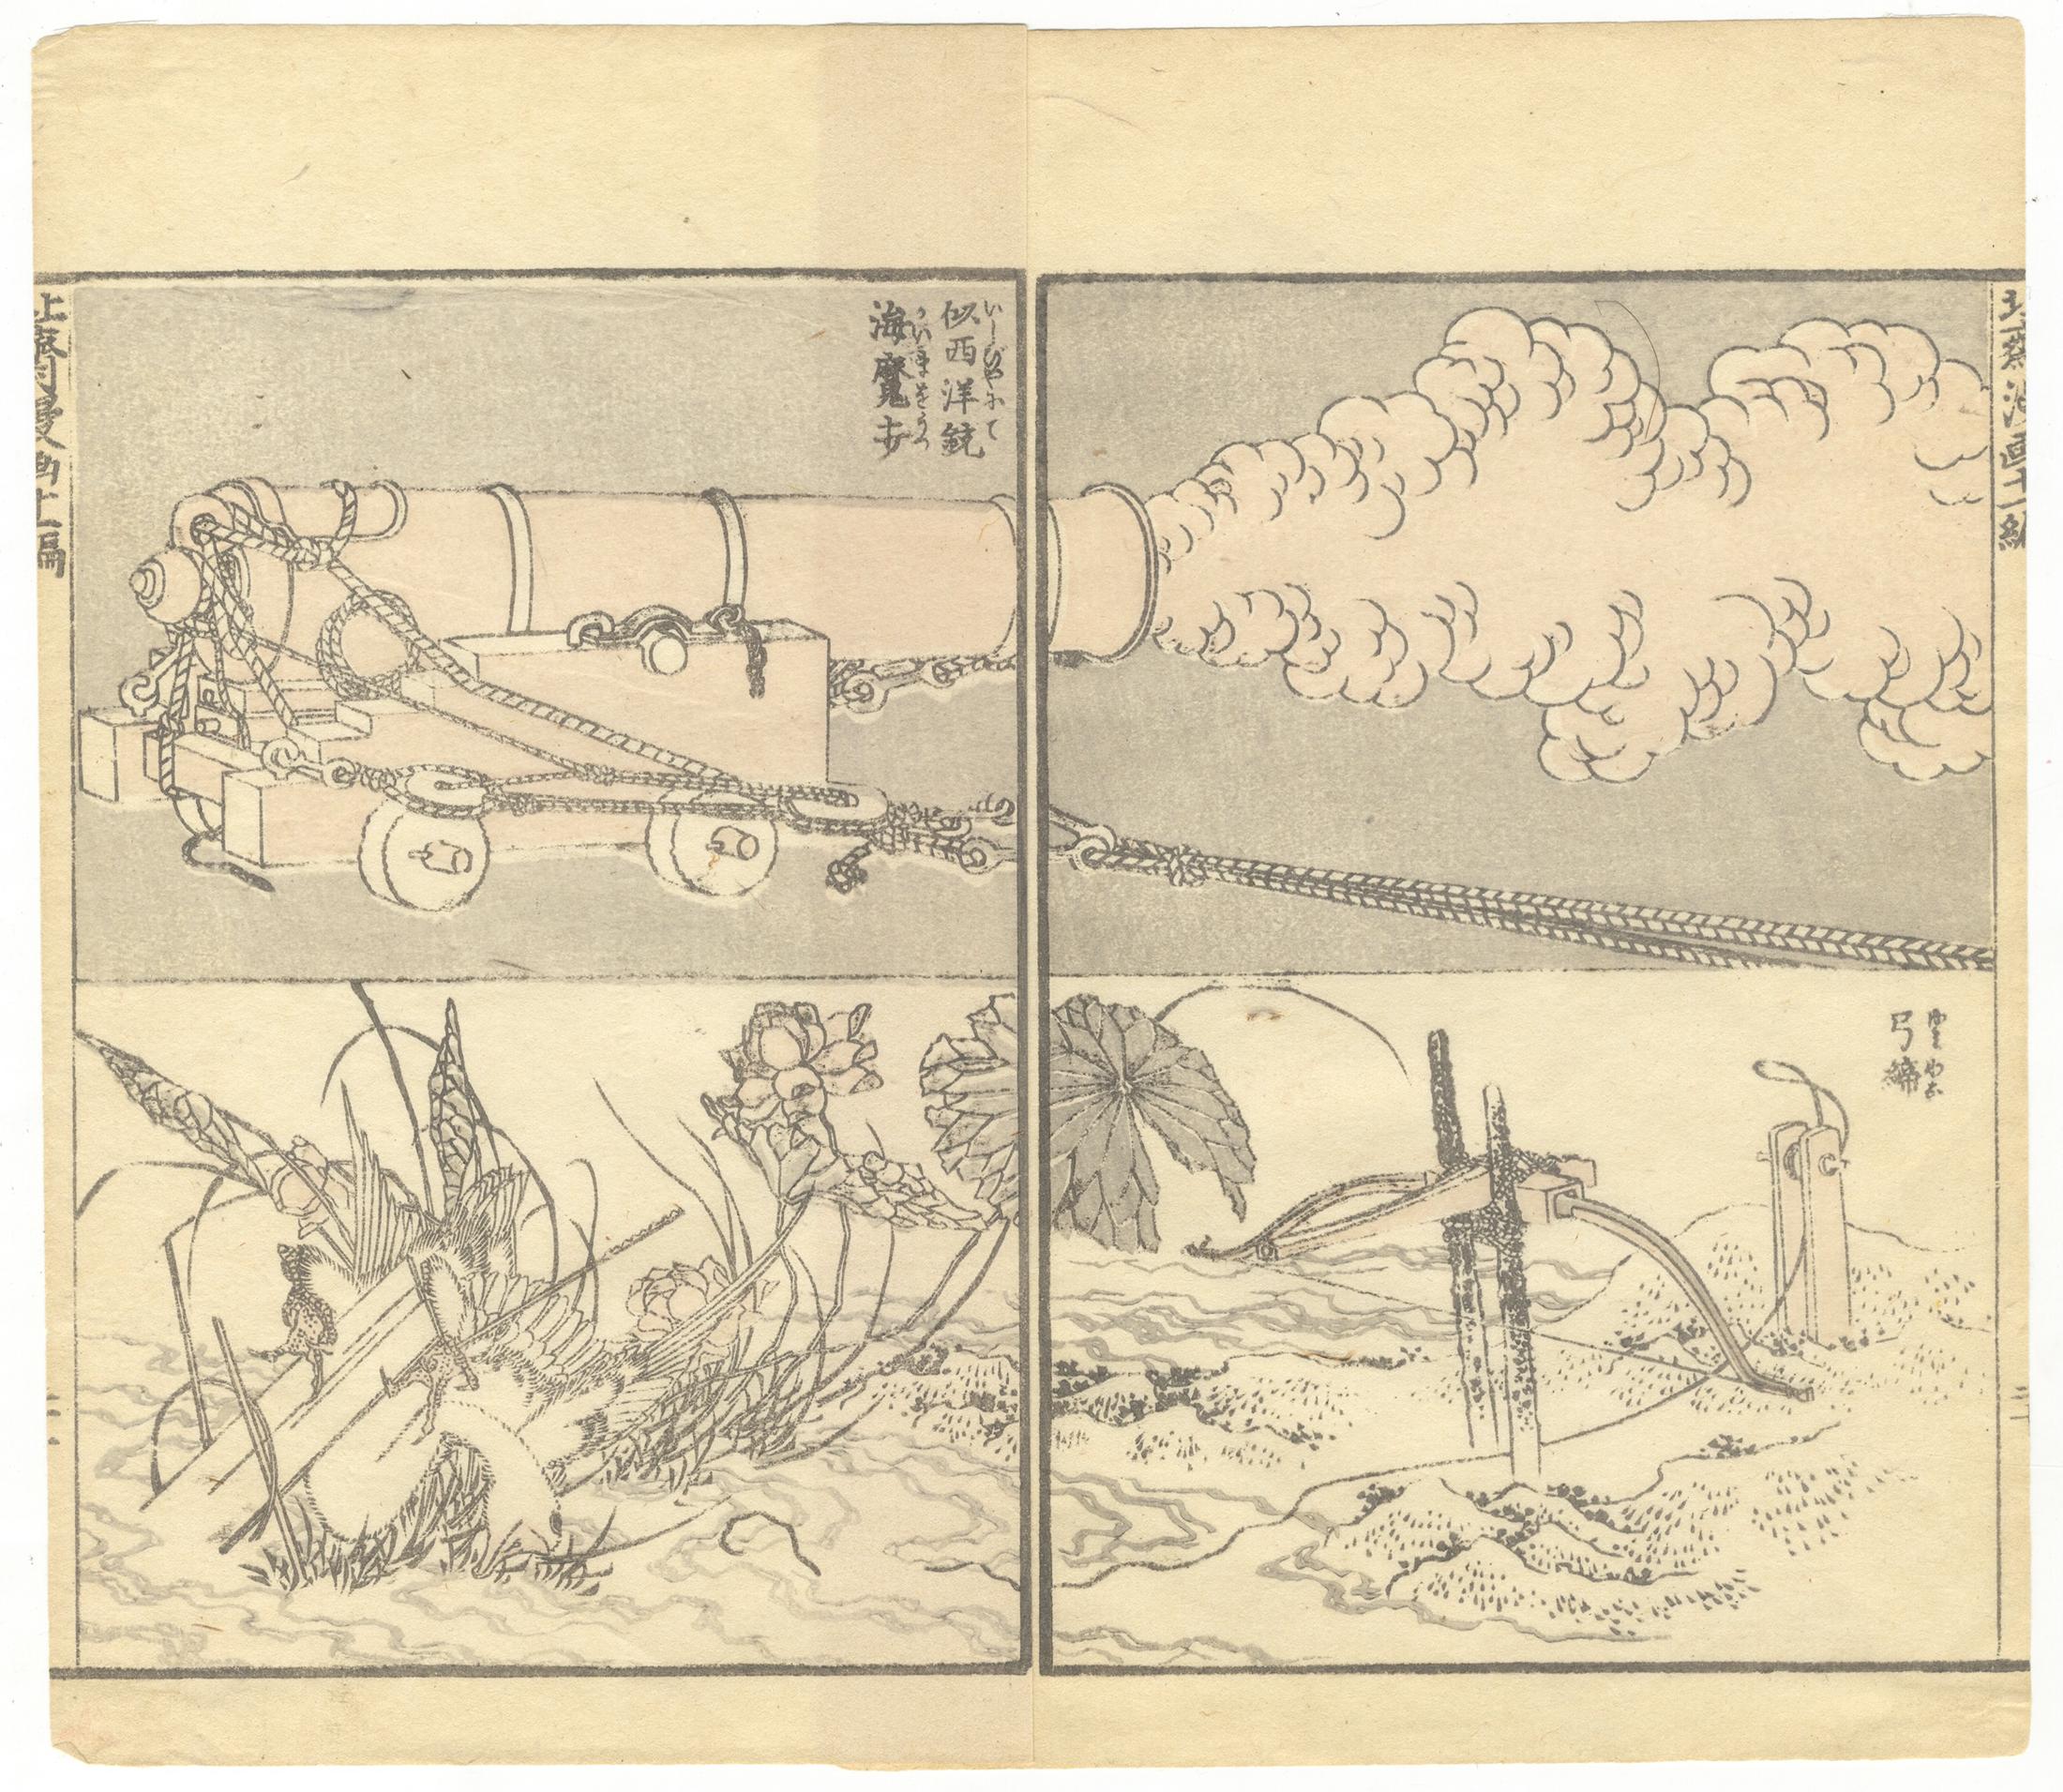 Artist: Katsushika Hokusai
Title: War Artillery
Series: Hokusai Manga Volume 3
Publisher: Toheki-do
Date: 1814-1878
Size: 25.8 x 22.6 cm
Condition report: Slightly trimmed, two panels joined together, some creases and worn-out corners, small paper